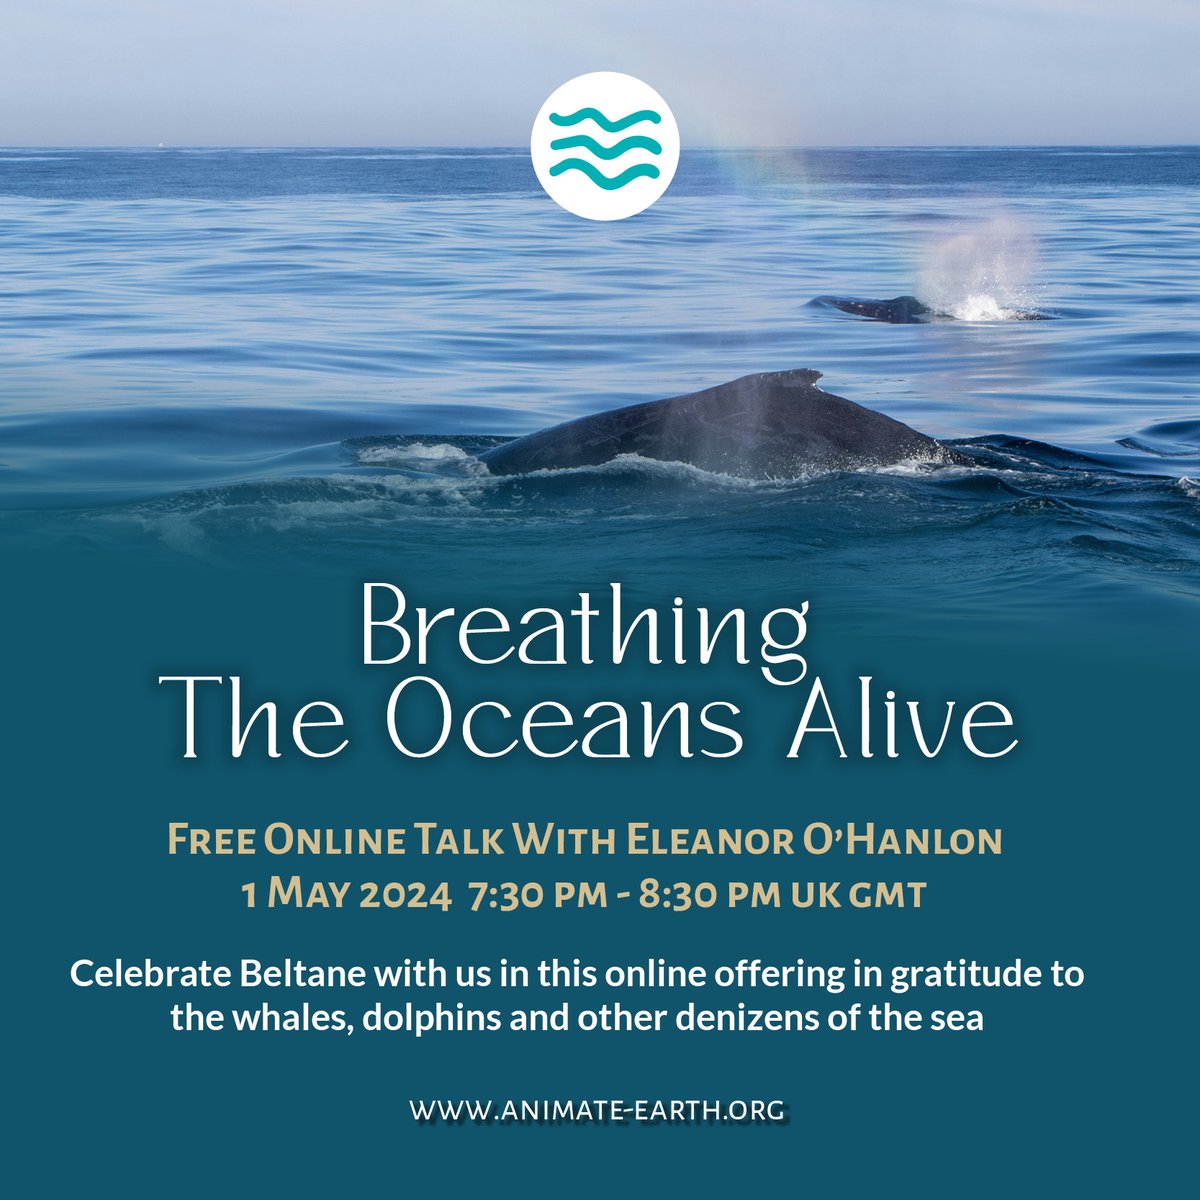 In April and May, the blue whales, fin whales, rare sei whales and humpback whales arrive off the coast of the Azores on their spring migrations, and join resident sperm whale families and four species of dolphins. Join Animate Earth Collective as we bring in Eleanor O’Hanlon,